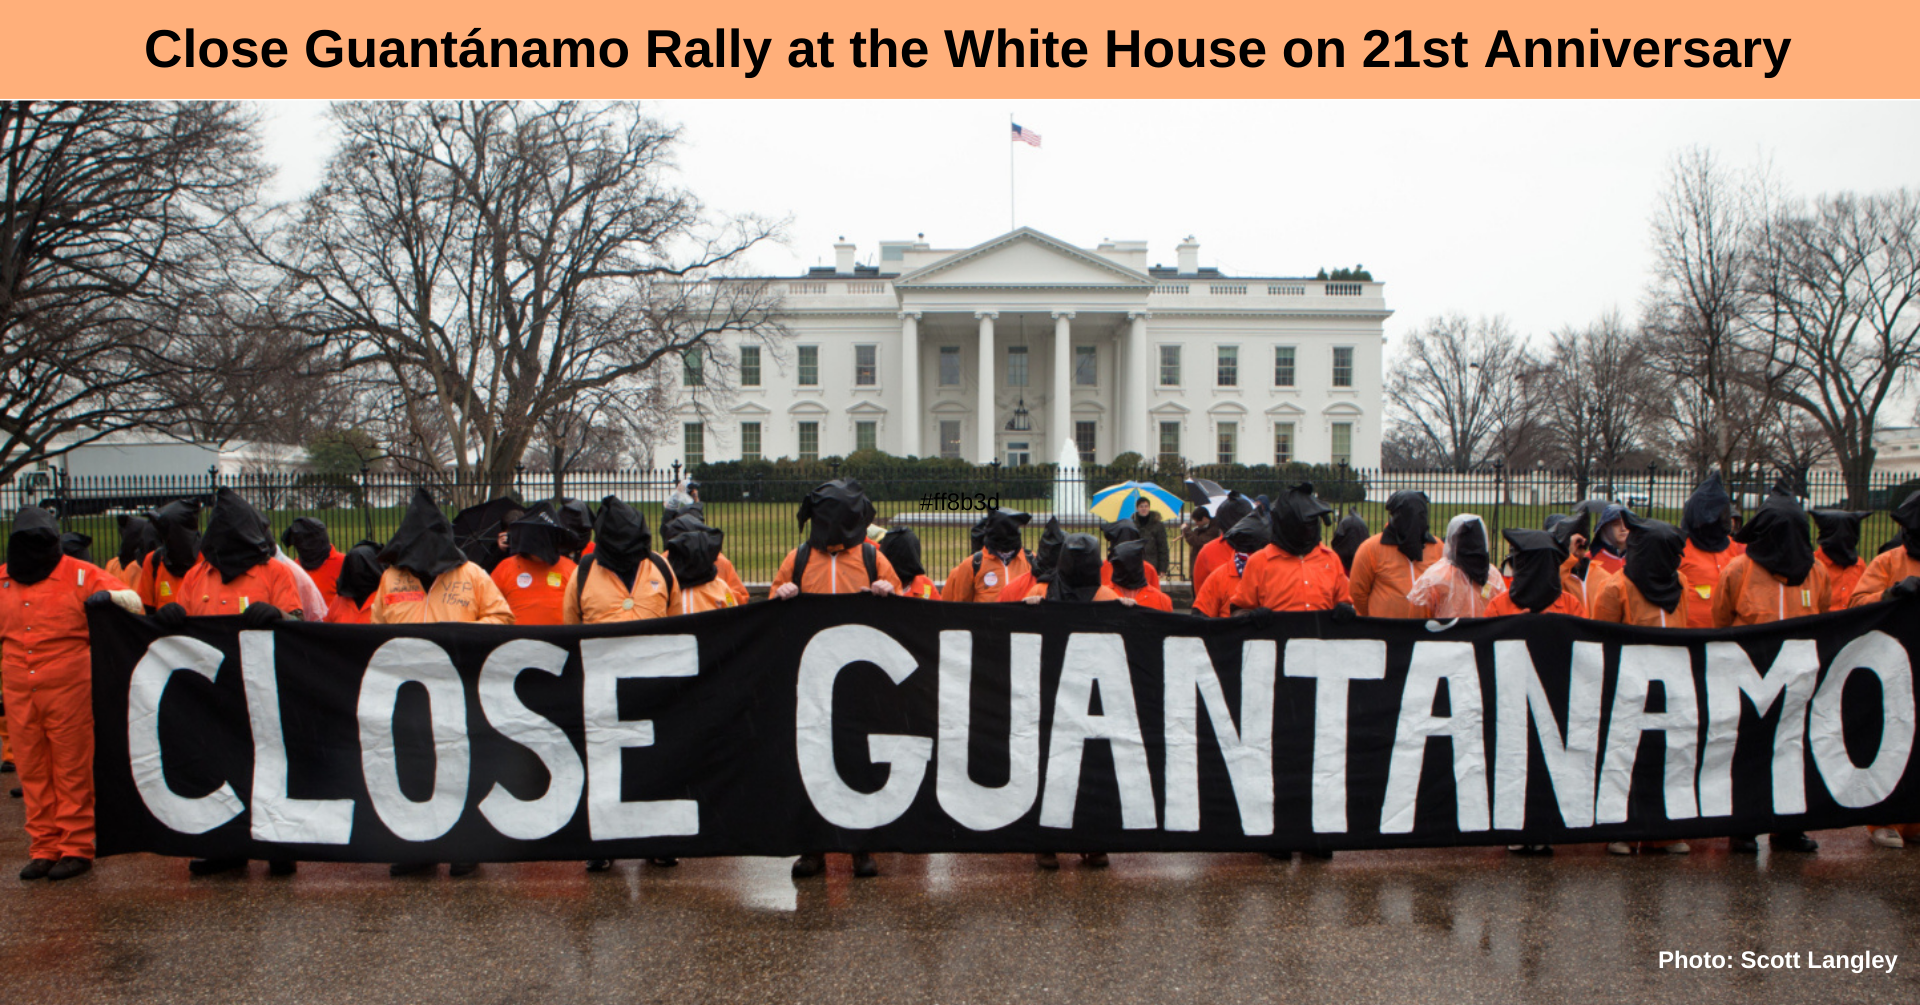 Event flyer. Rectangular graphic that is black, orange, and gray.  The text at the top reads, “Building our power to close Guantánamo” and is in black with an orange back behind it.  On the bottom of the graphic, the text reads, “21st Anniversary Virtual rally, Wednesday, January 11, 2023, 4 PM ET, bit.ly/CloseGitmo2023 (case sensitive).” The graphic also has a black-and-white photo of protestors by the White House with signs that say “Close Guantánamo now!” and “President Biden why is Guantánamo open?”